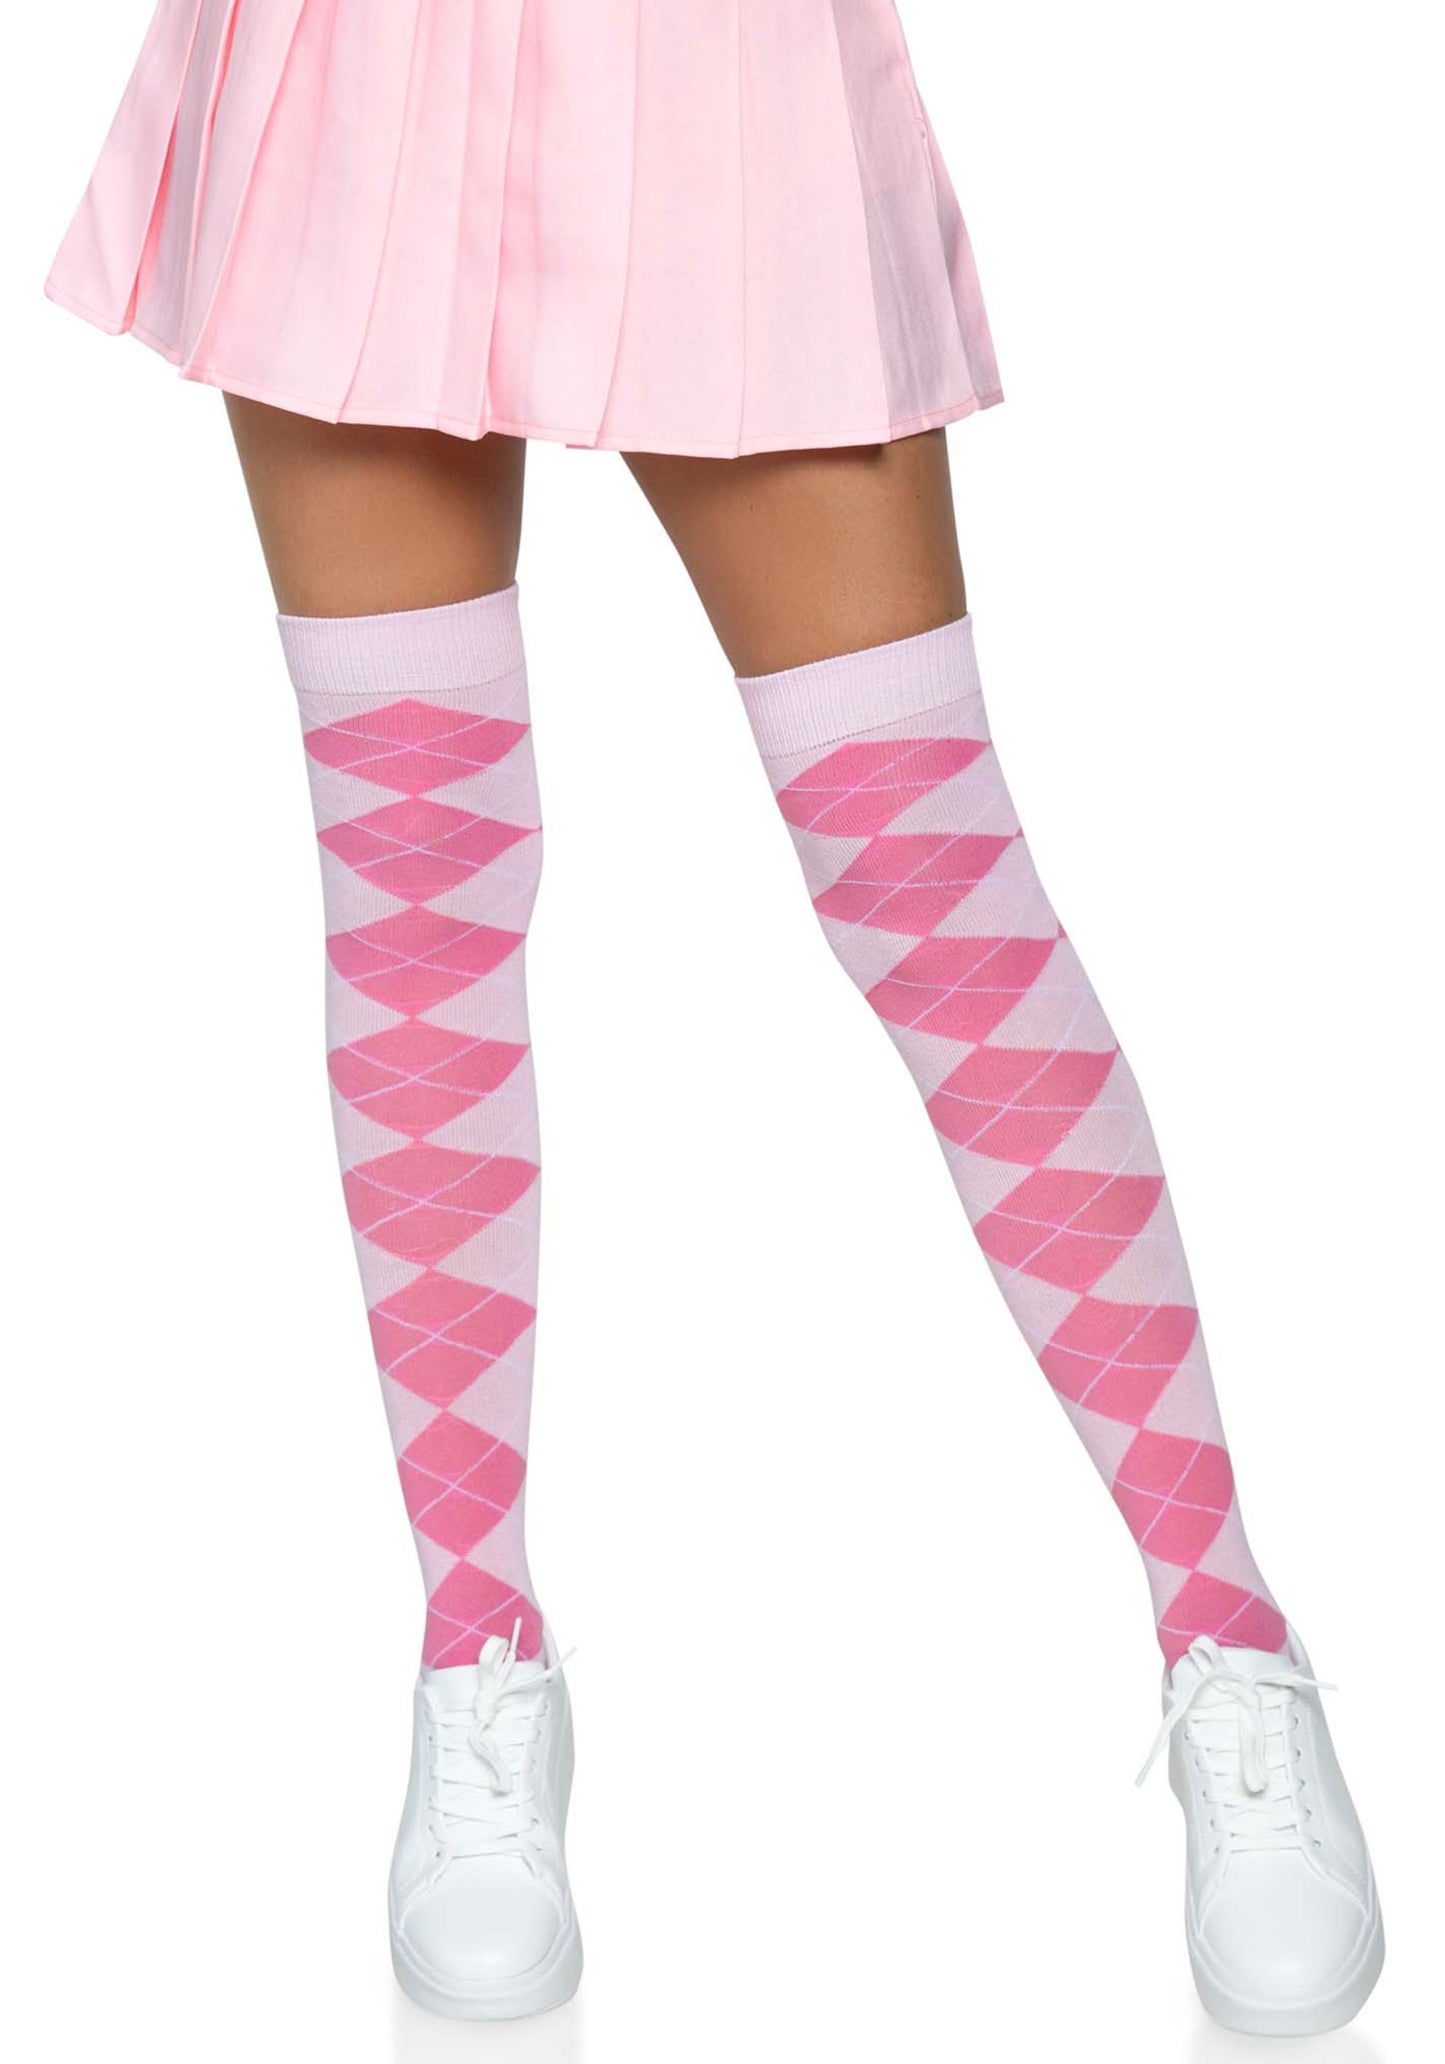 Leg Avenue Argyle Thigh Highs - Pink knitted argyle diamond golf style patterned over the knee socks.